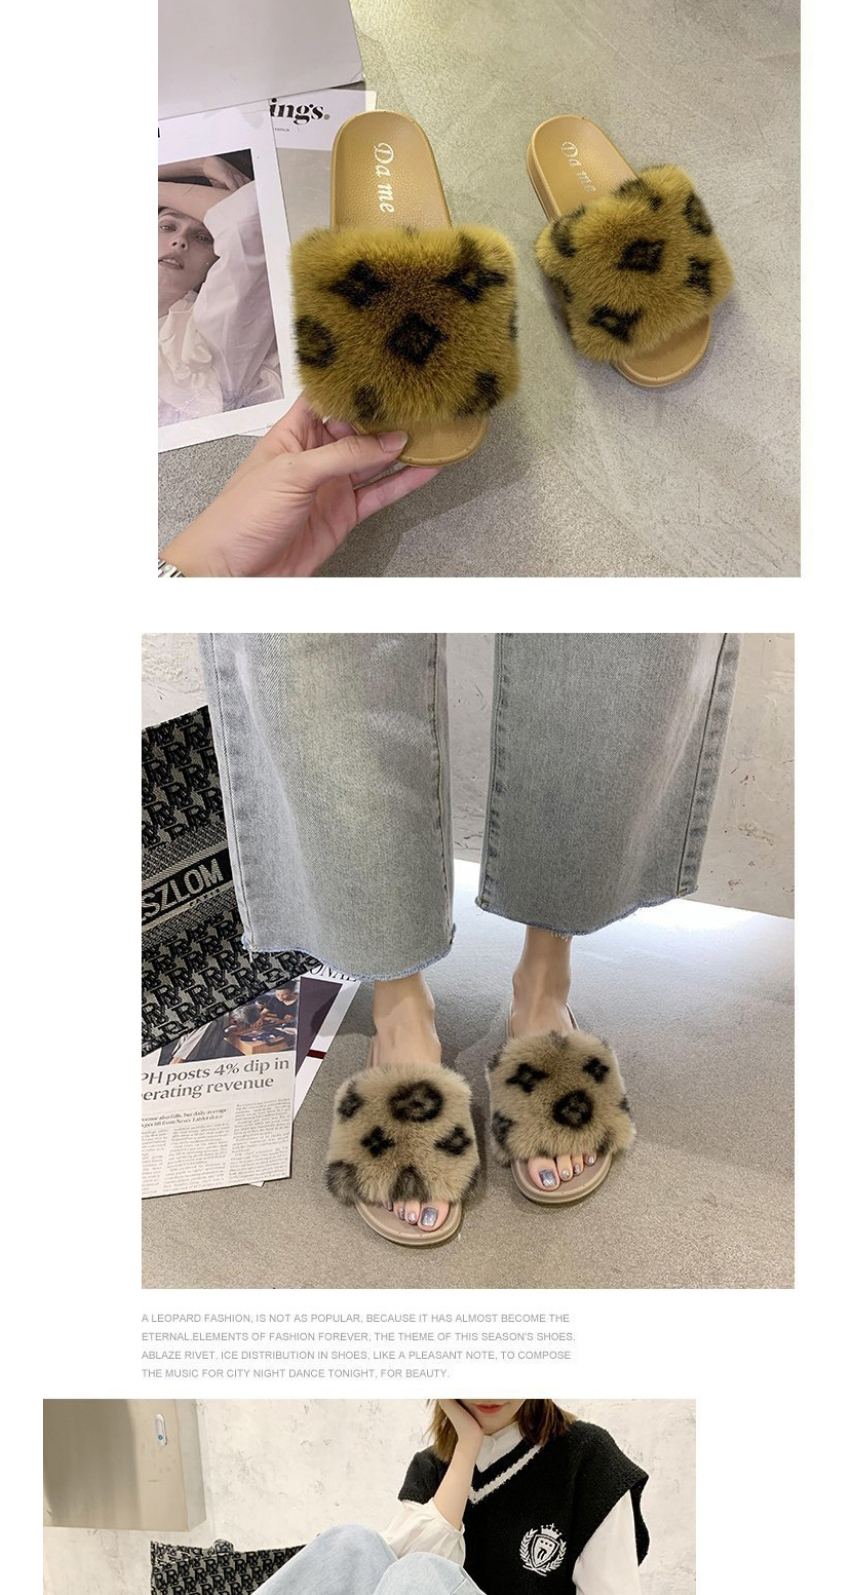 Fashion Yellowish Brown Leopard Print Round Head Flat-bottomed Fur Slippers,Slippers